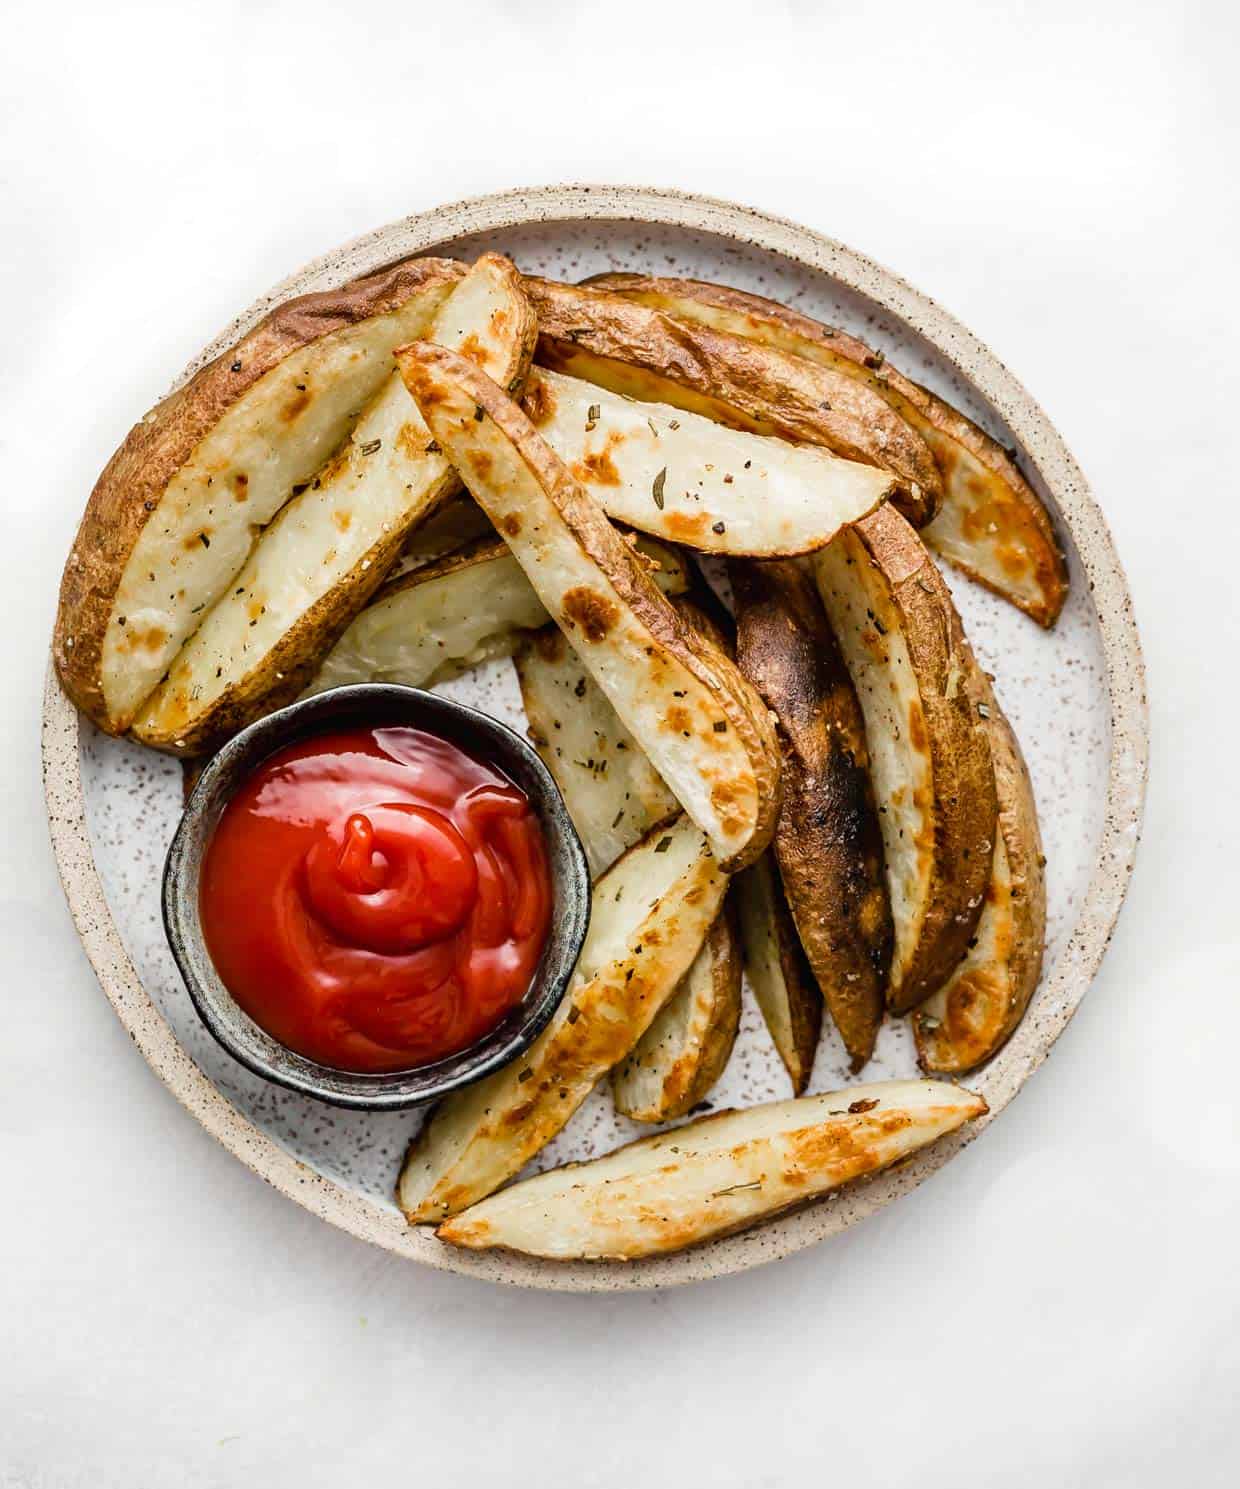 Crispy Baked Potato Wedges on a plate with a black bowl filled with ketchup.